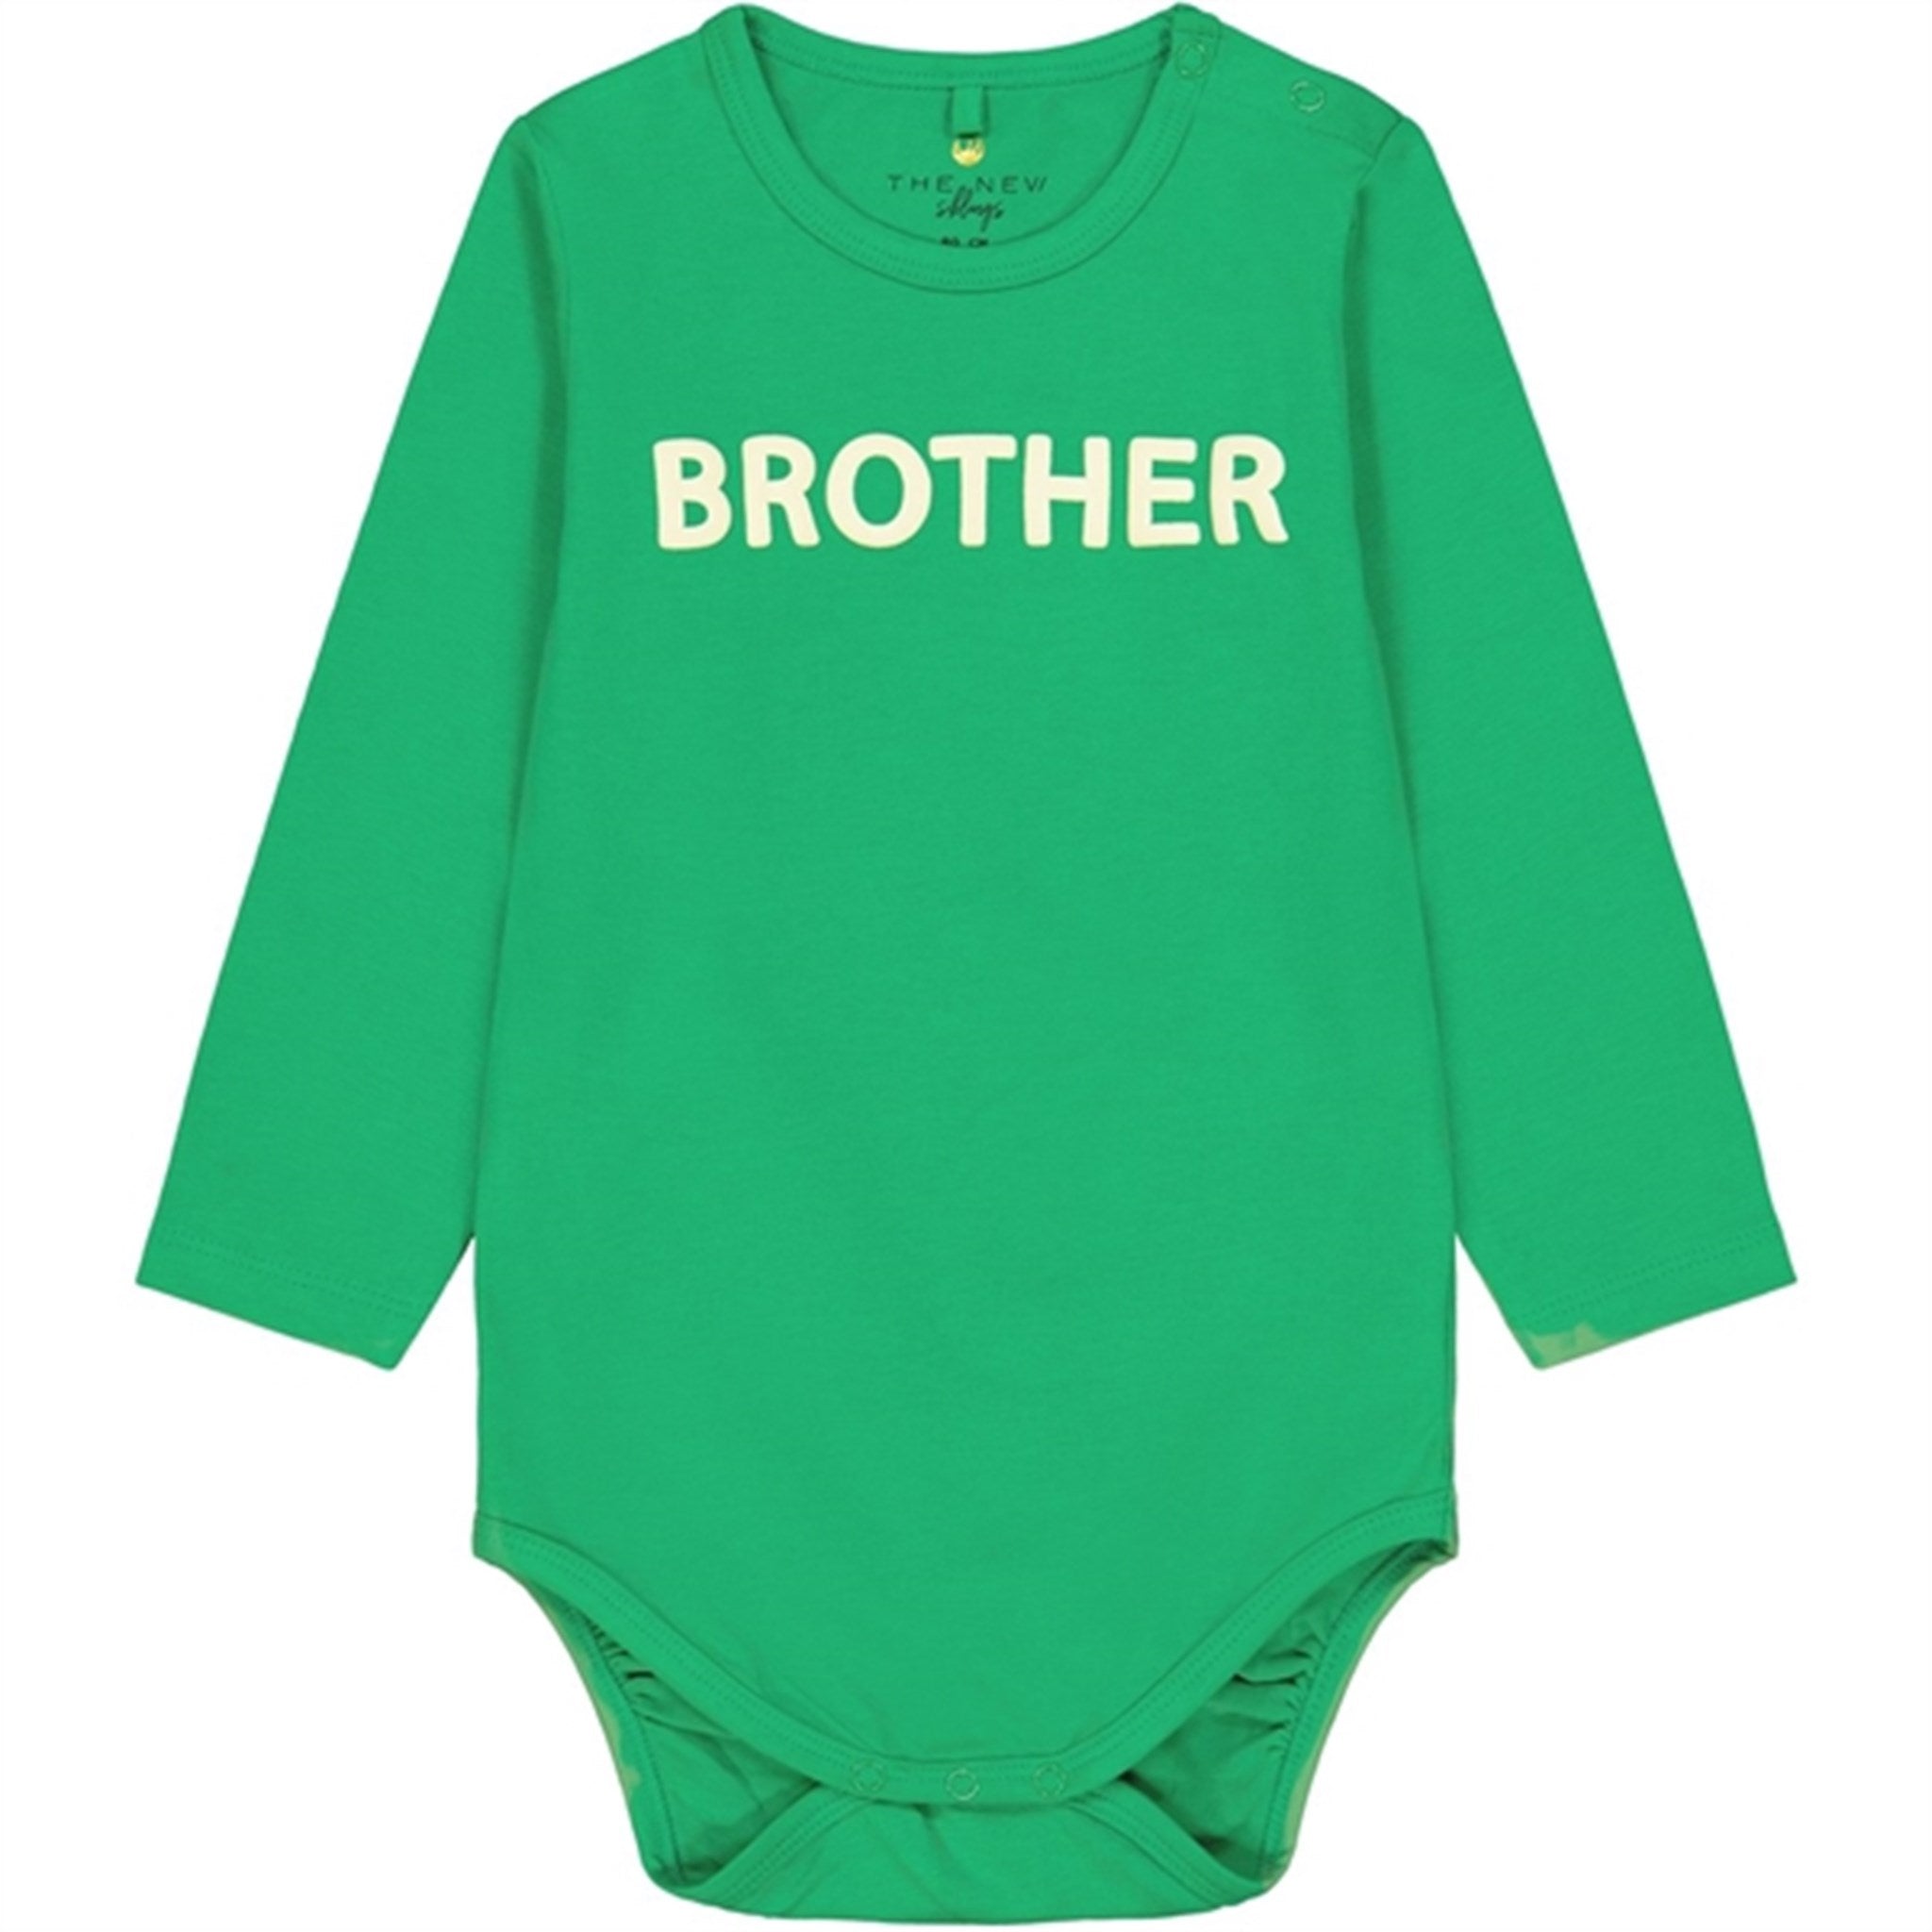 The NEW Siblings Bright Green Brother Body